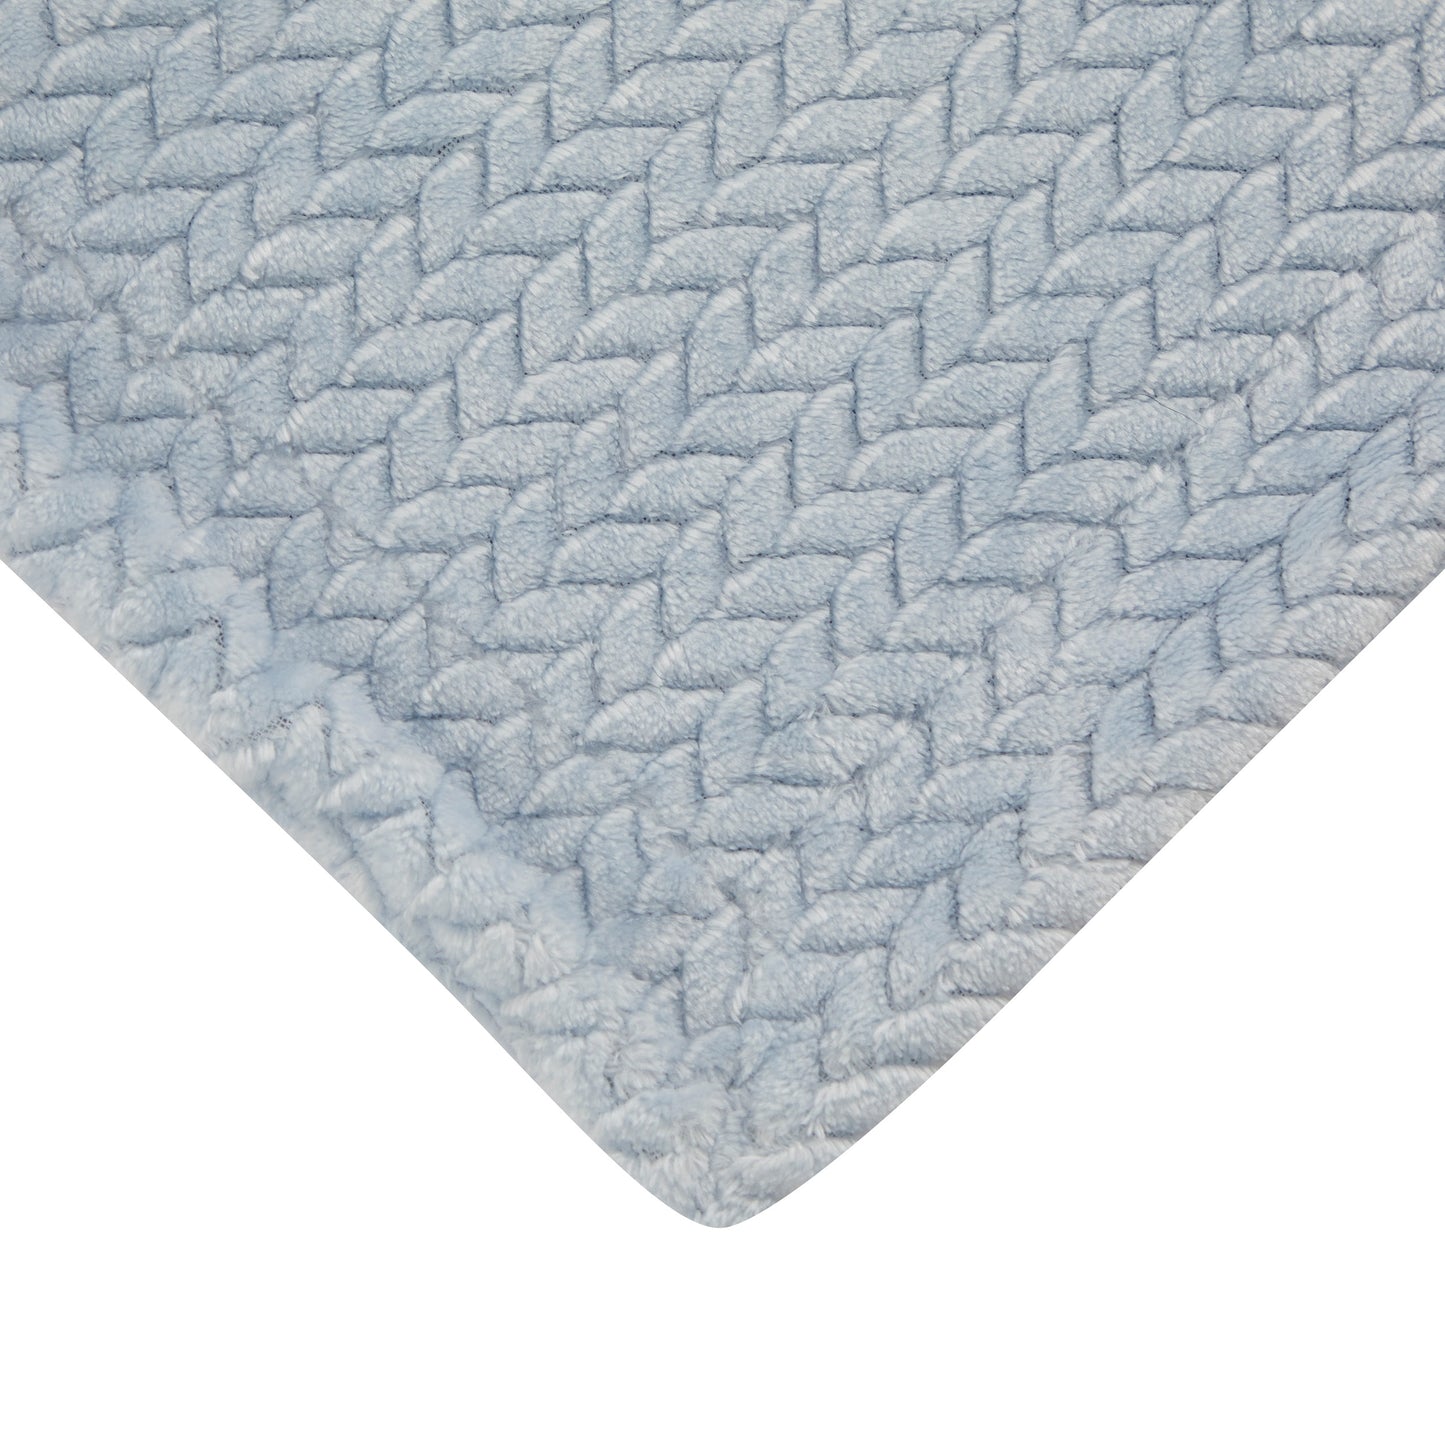 Mon Lapin by Thesis Textured Weave Embossed Baby Blanket - Powder